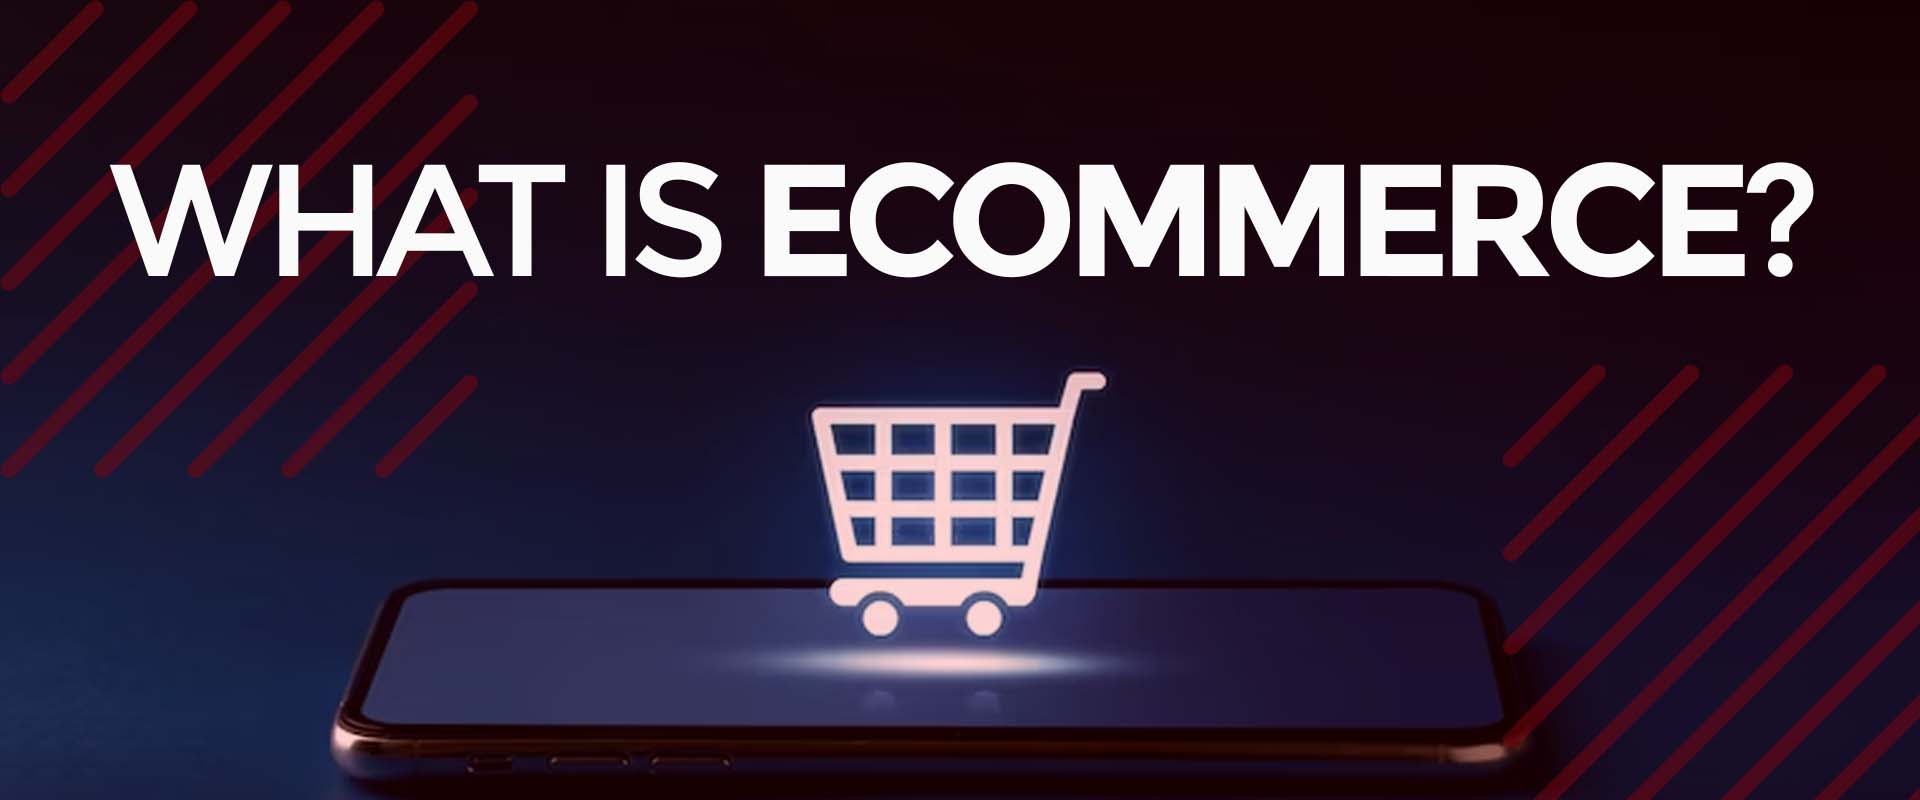 About what is ecommerce